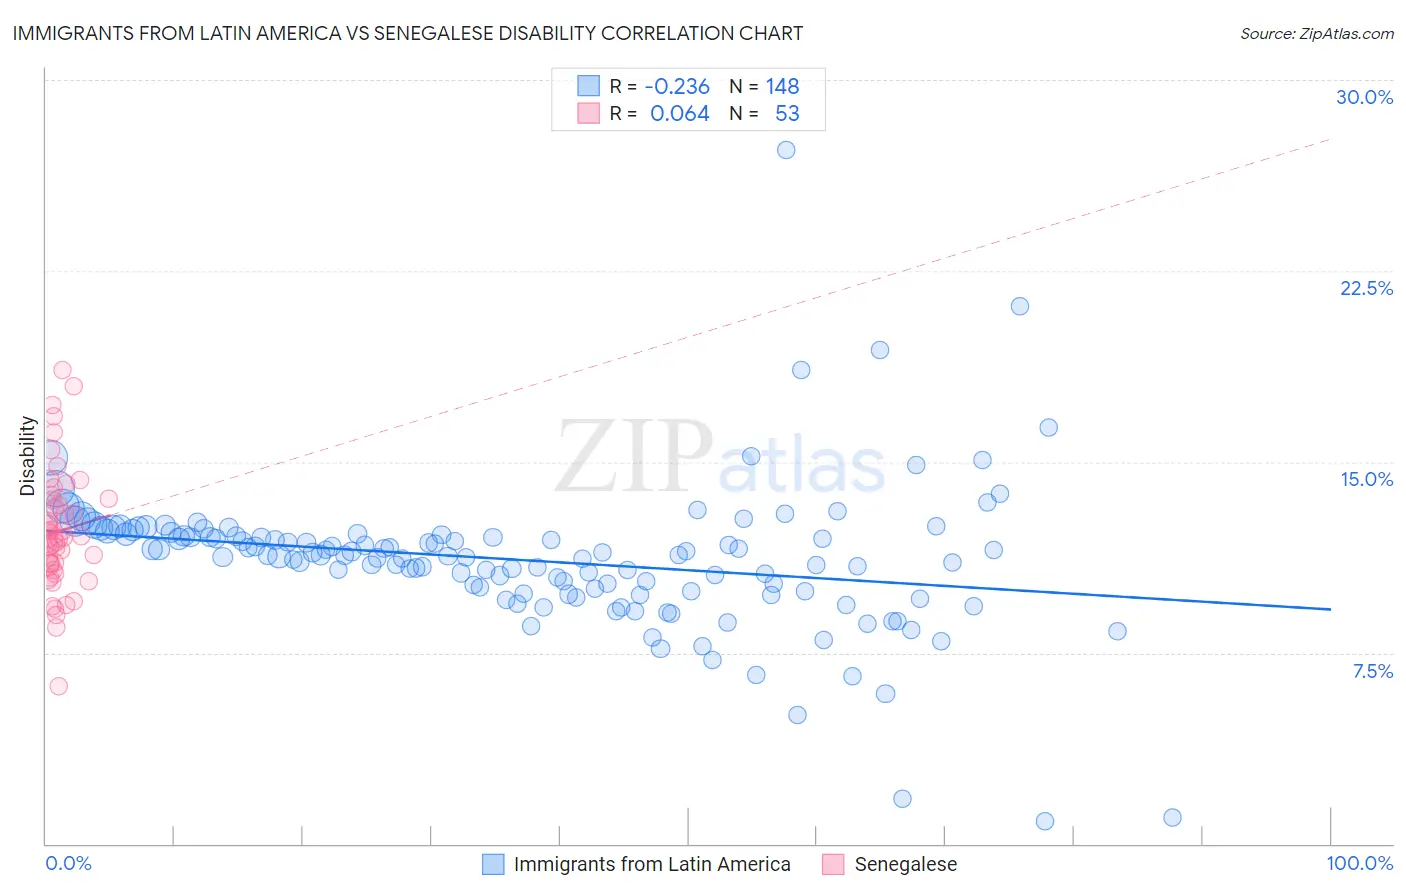 Immigrants from Latin America vs Senegalese Disability